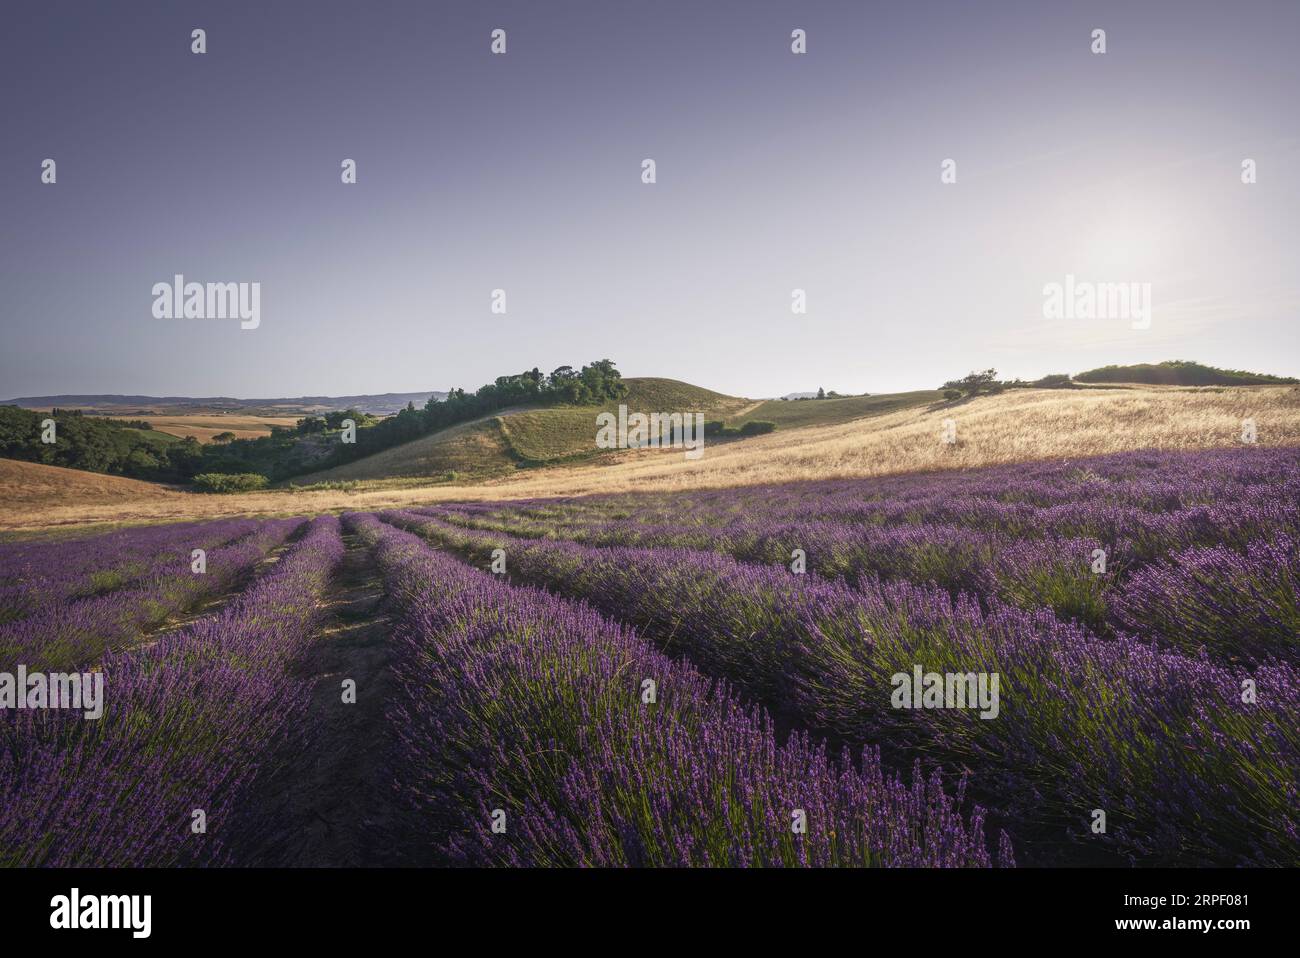 Lavender field in Tuscany. Landscape at sunset in Orciano Pisano, province of Pisa, Italy Stock Photo